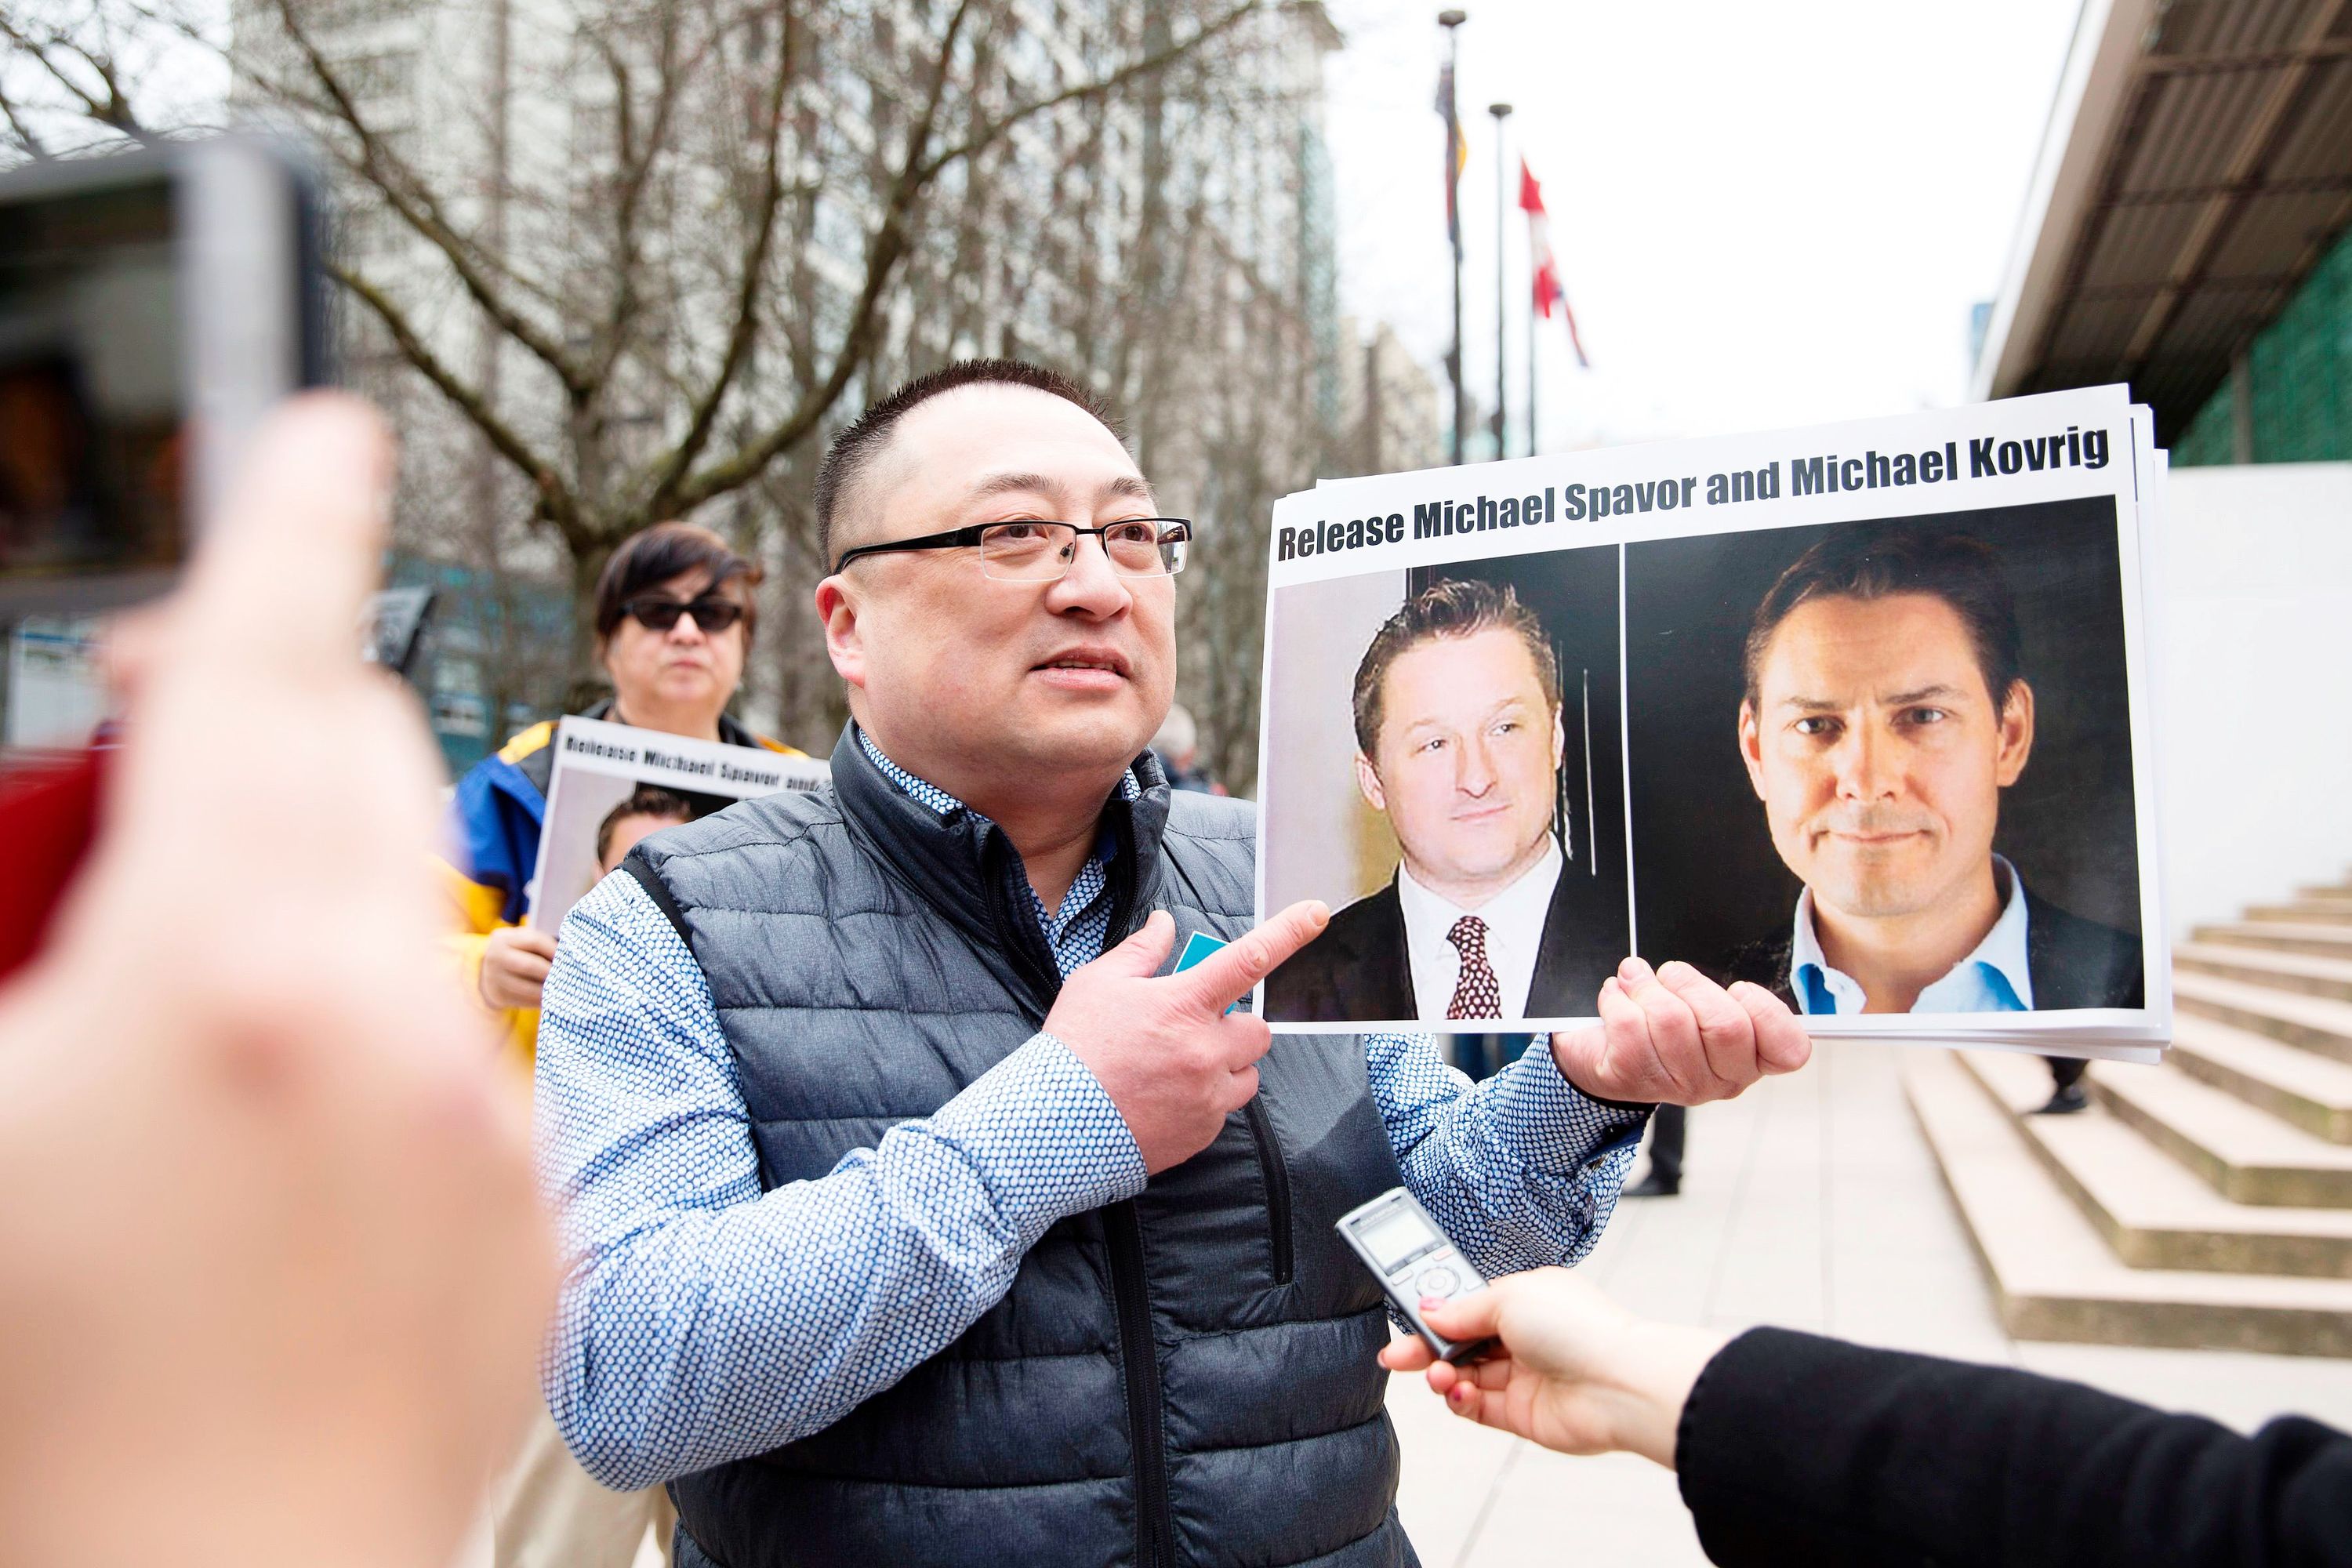 Claws of the Panda shines light on Canada’s naive response to China